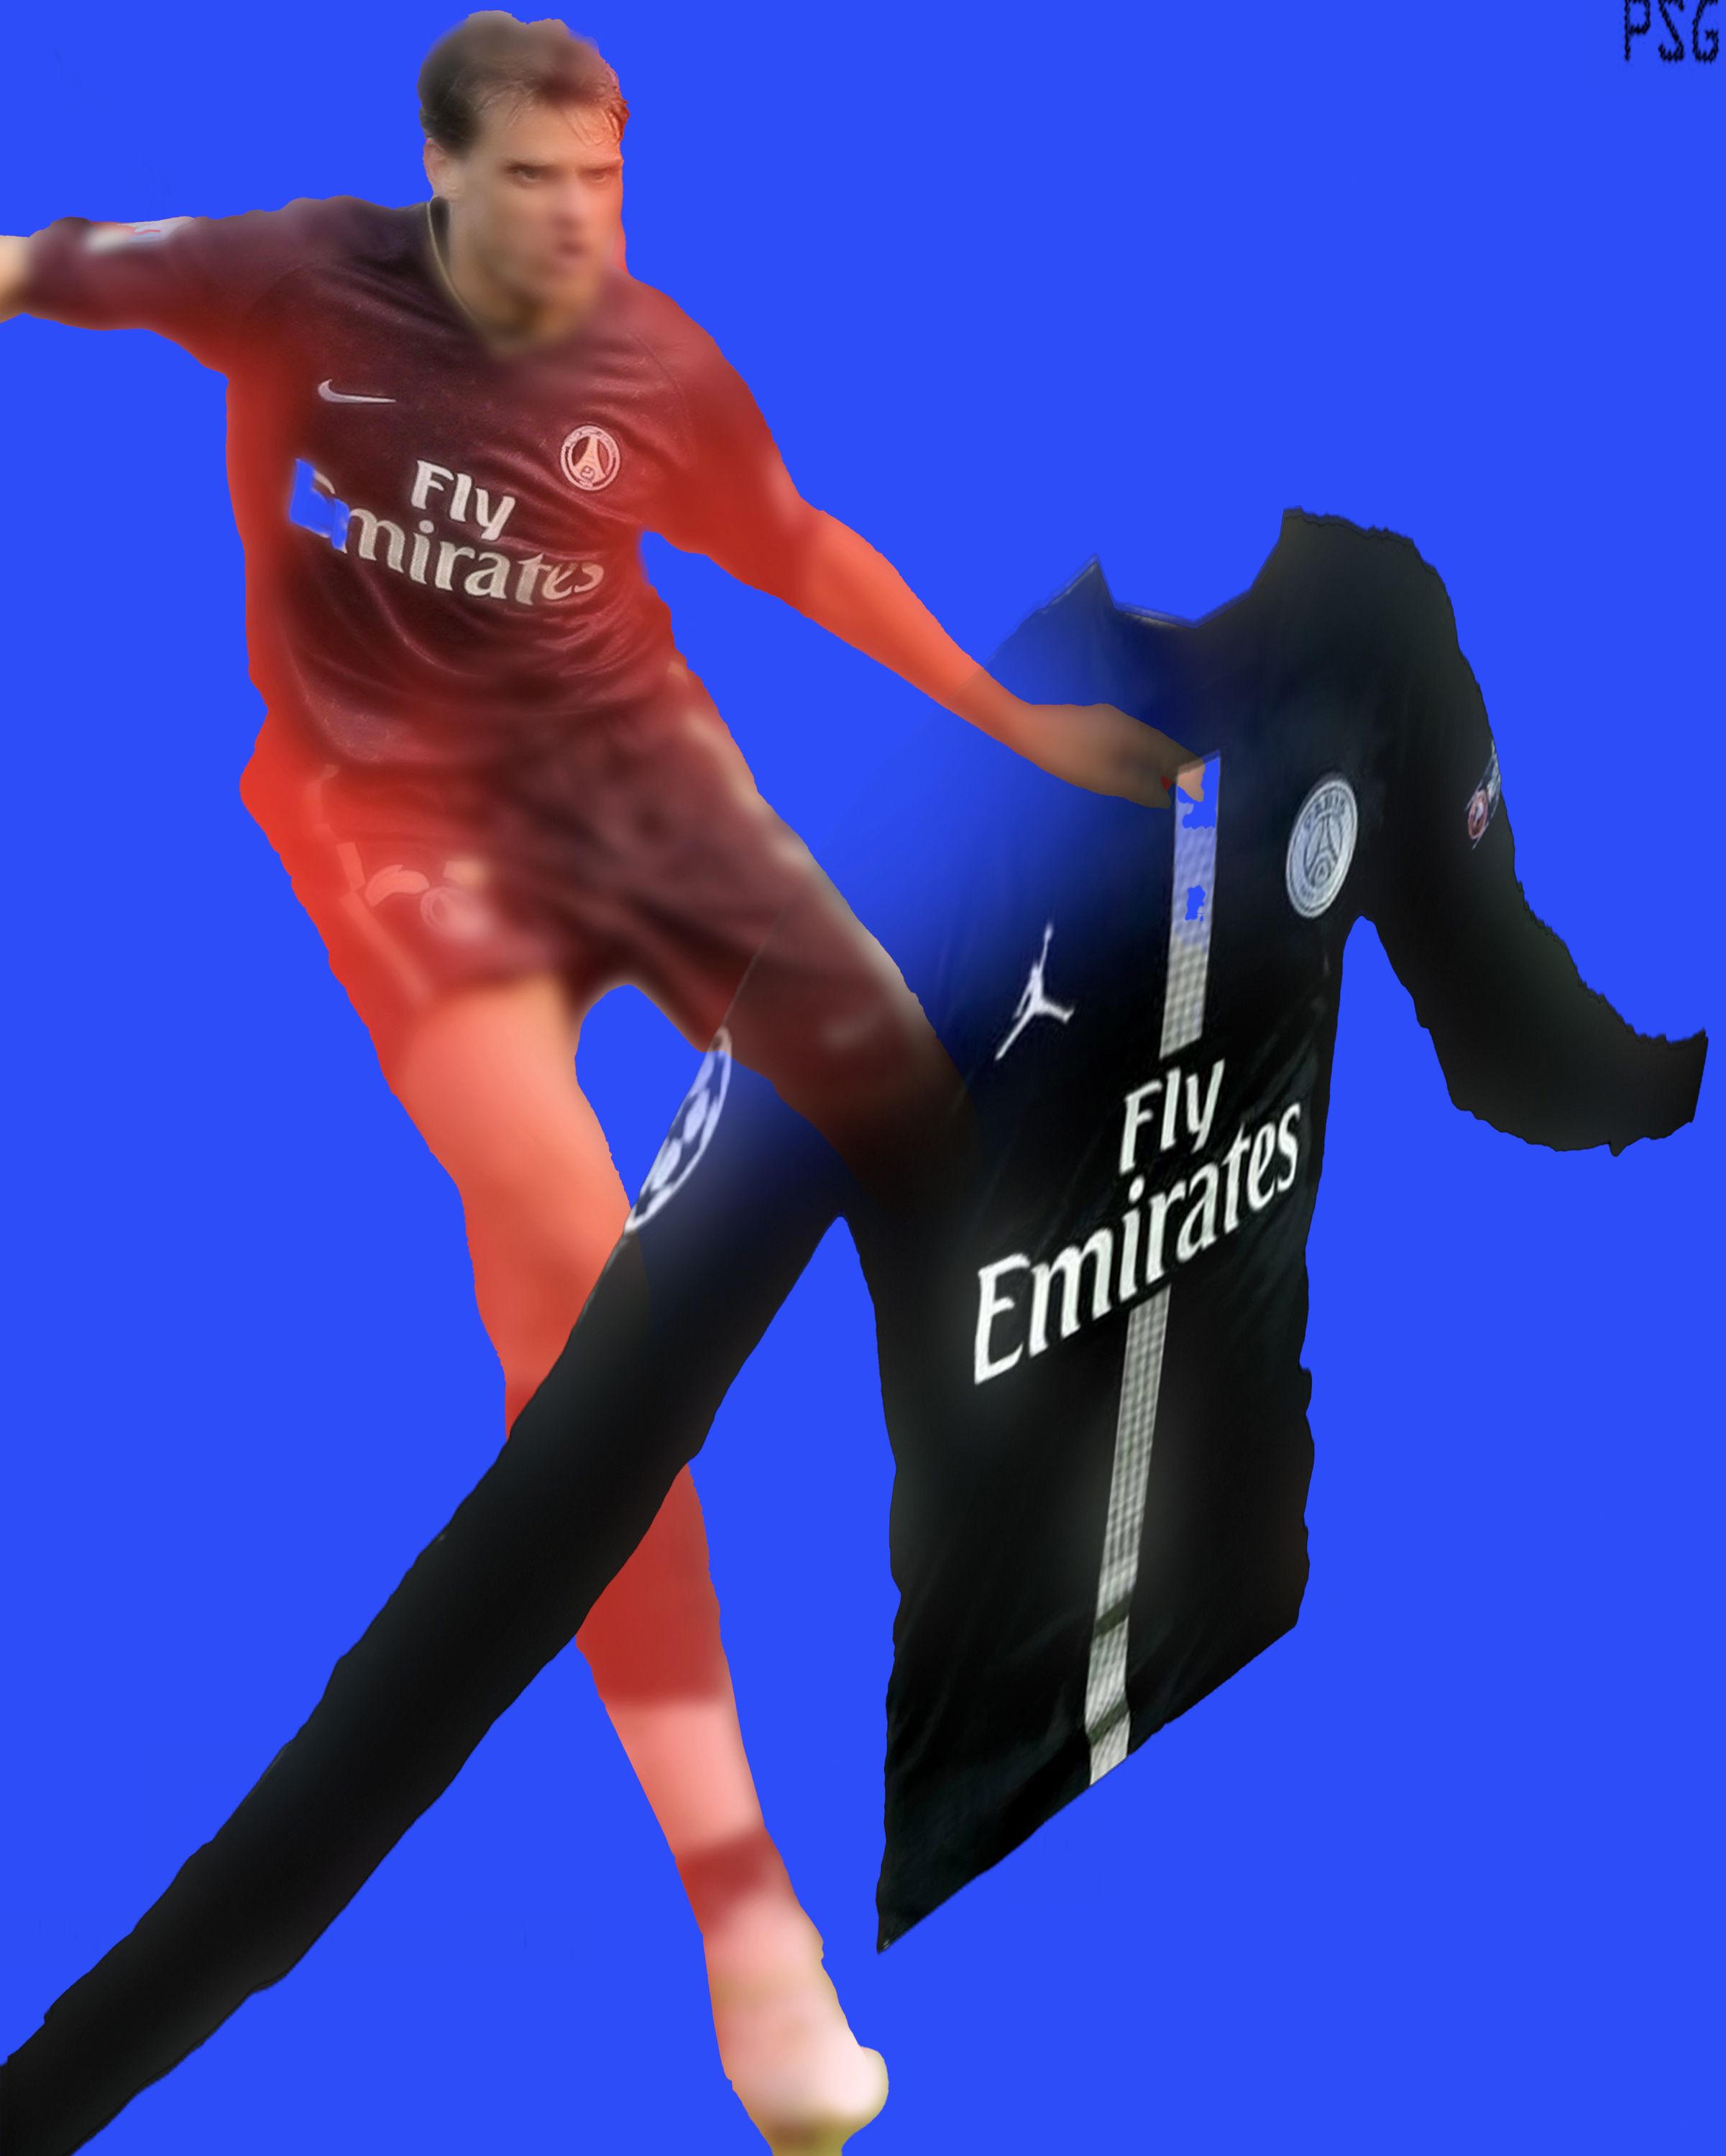 12 OF THE BEST PSG JERSEYS OF ALL TIME